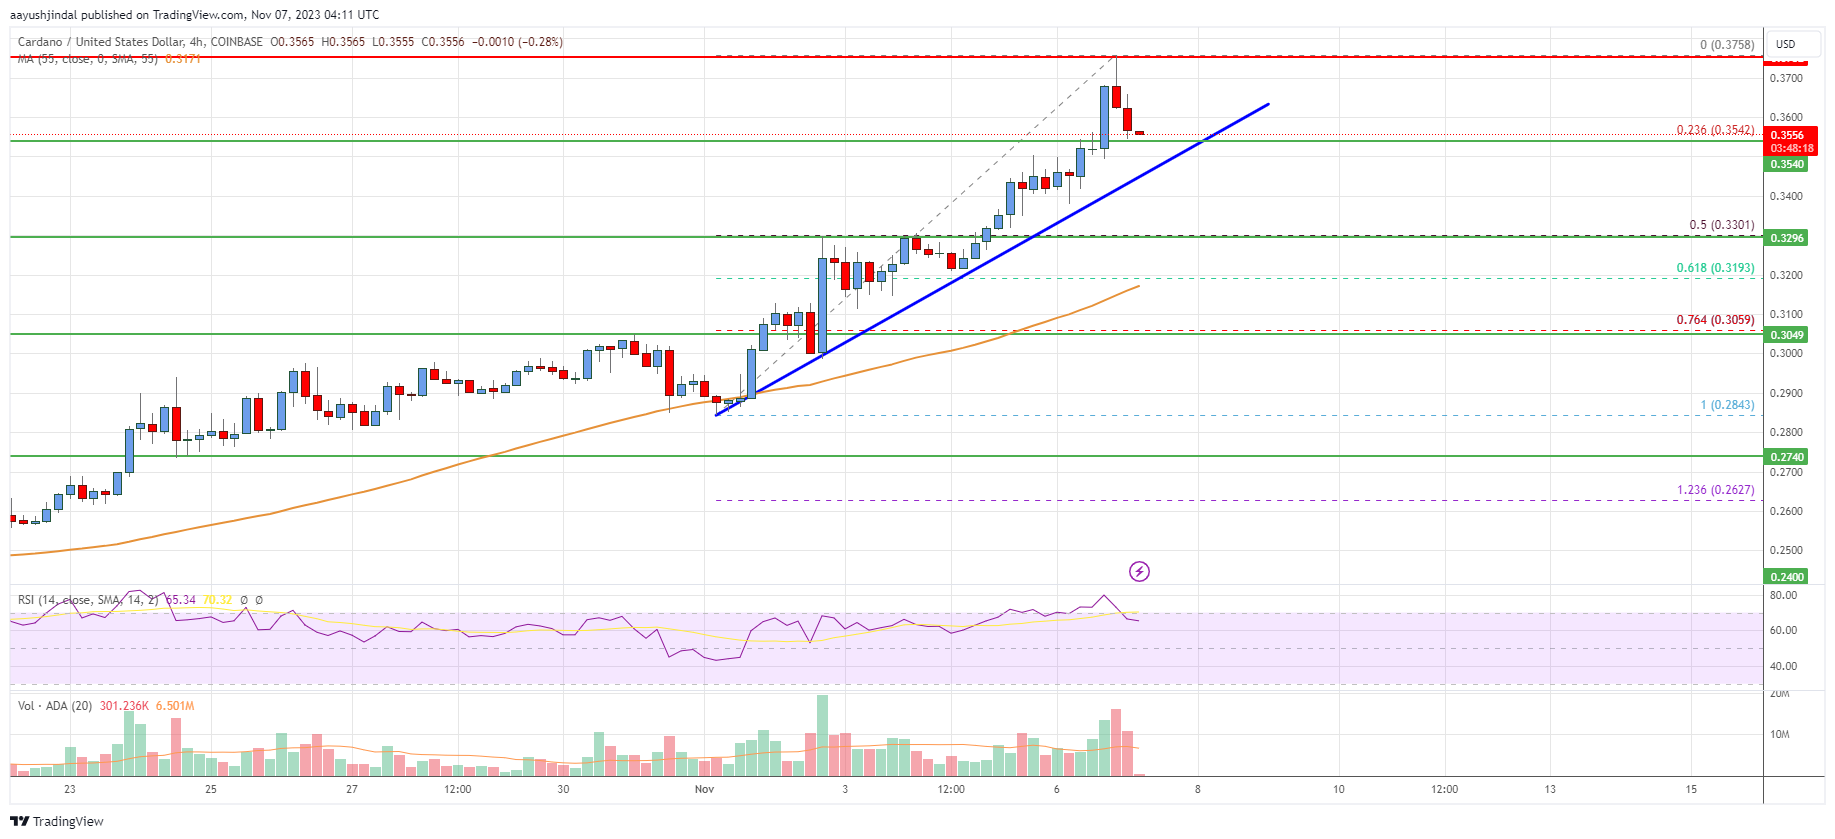 Cardano (ADA) Price Analysis: Rally Is Just Getting Started